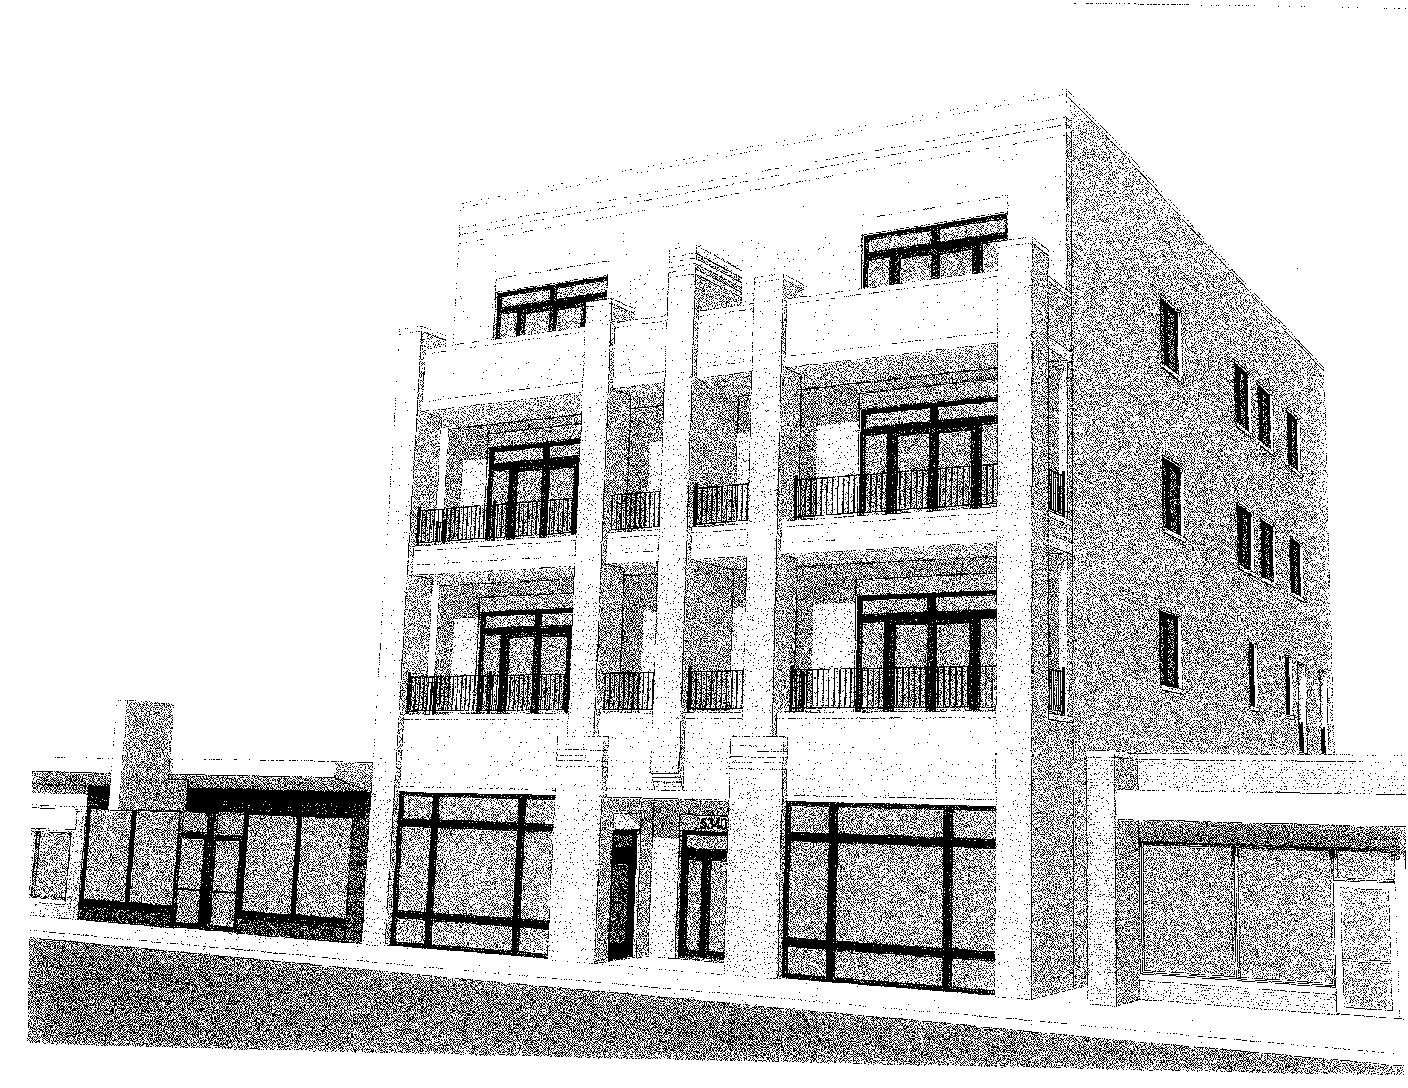 Community Zoning Update – 5338-40 N. LINCOLN AVE.